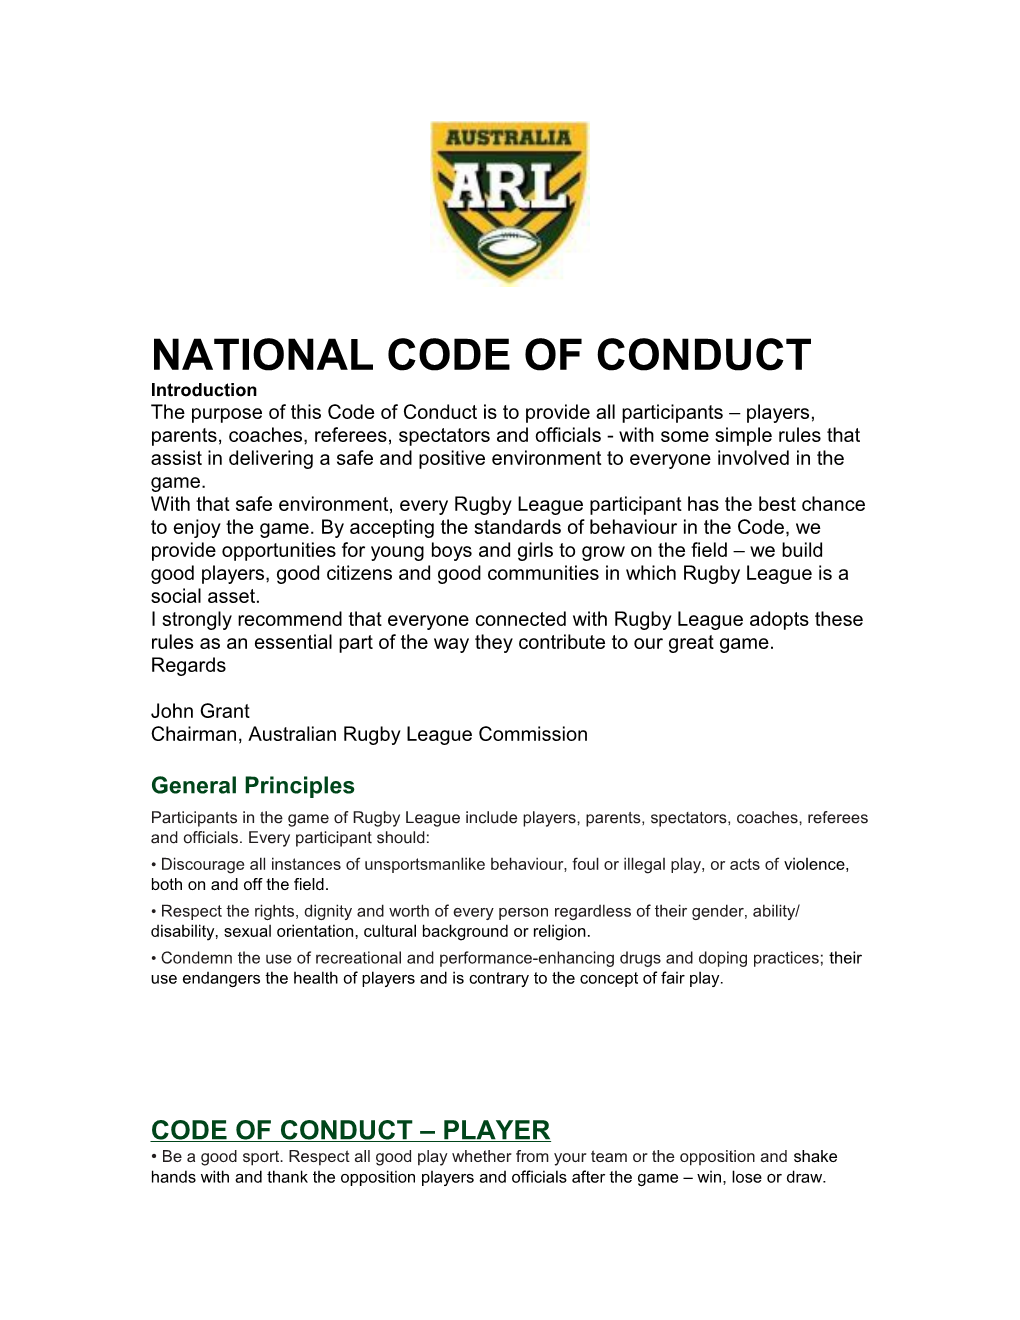 National Code of Conduct